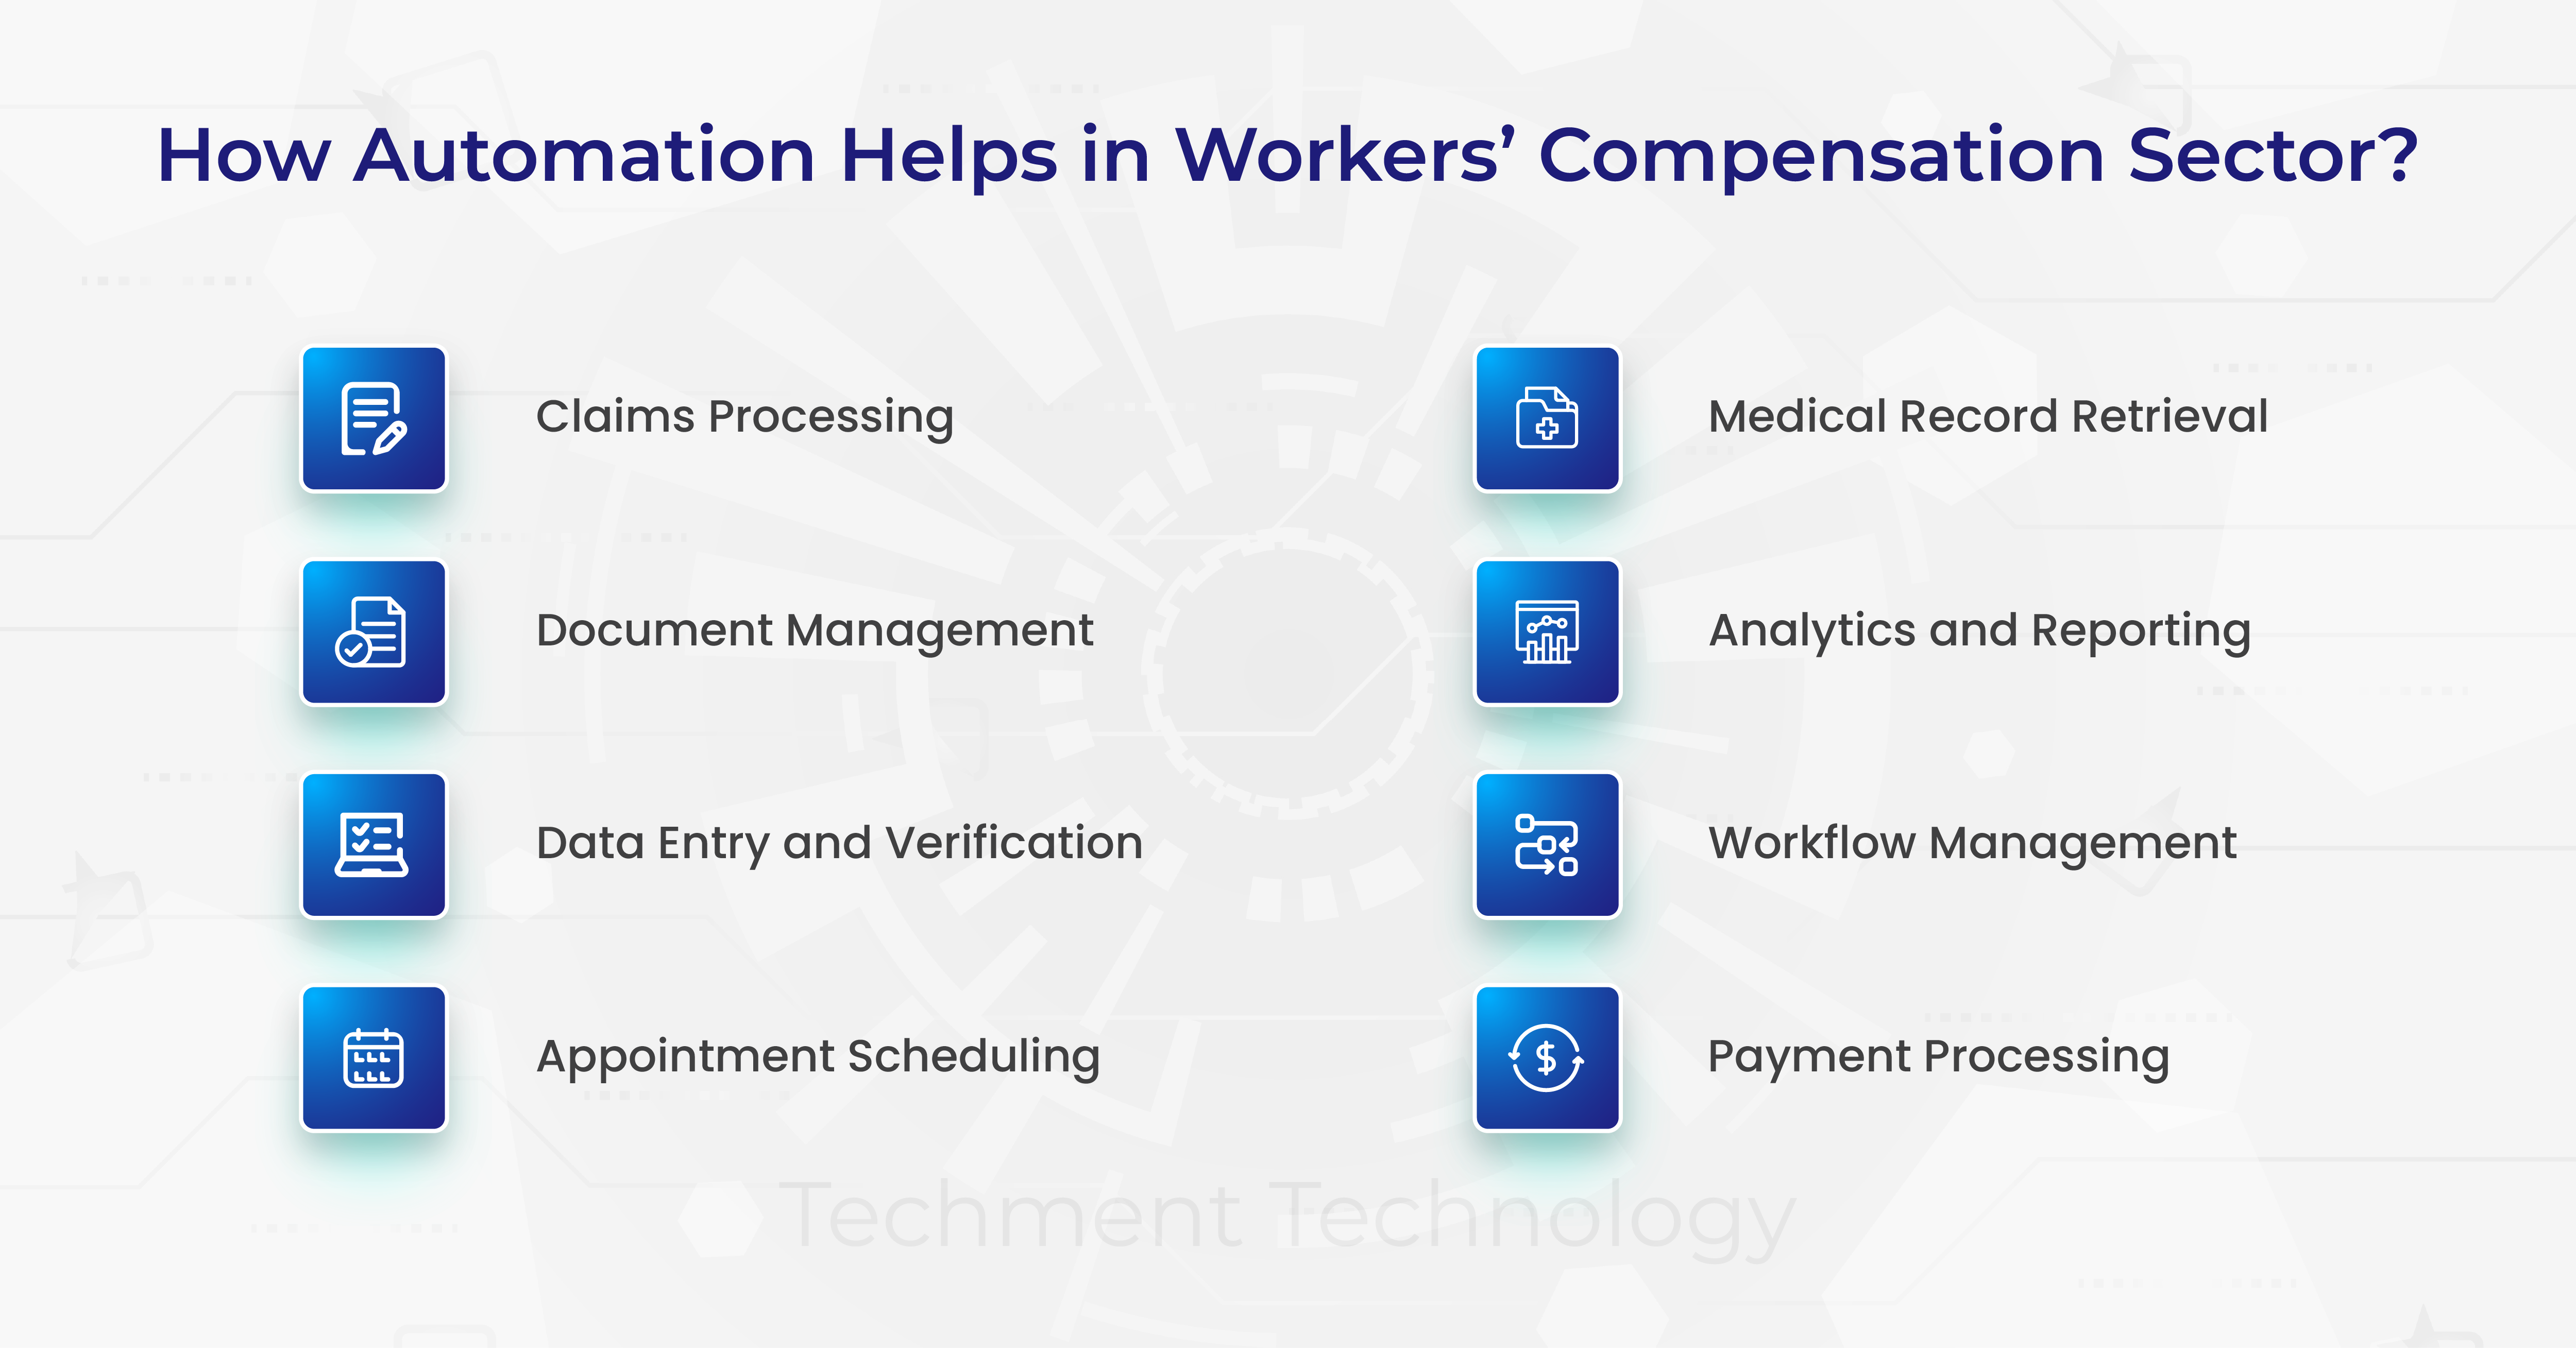 How Automation Helps in Workers’ Compensation Sector?